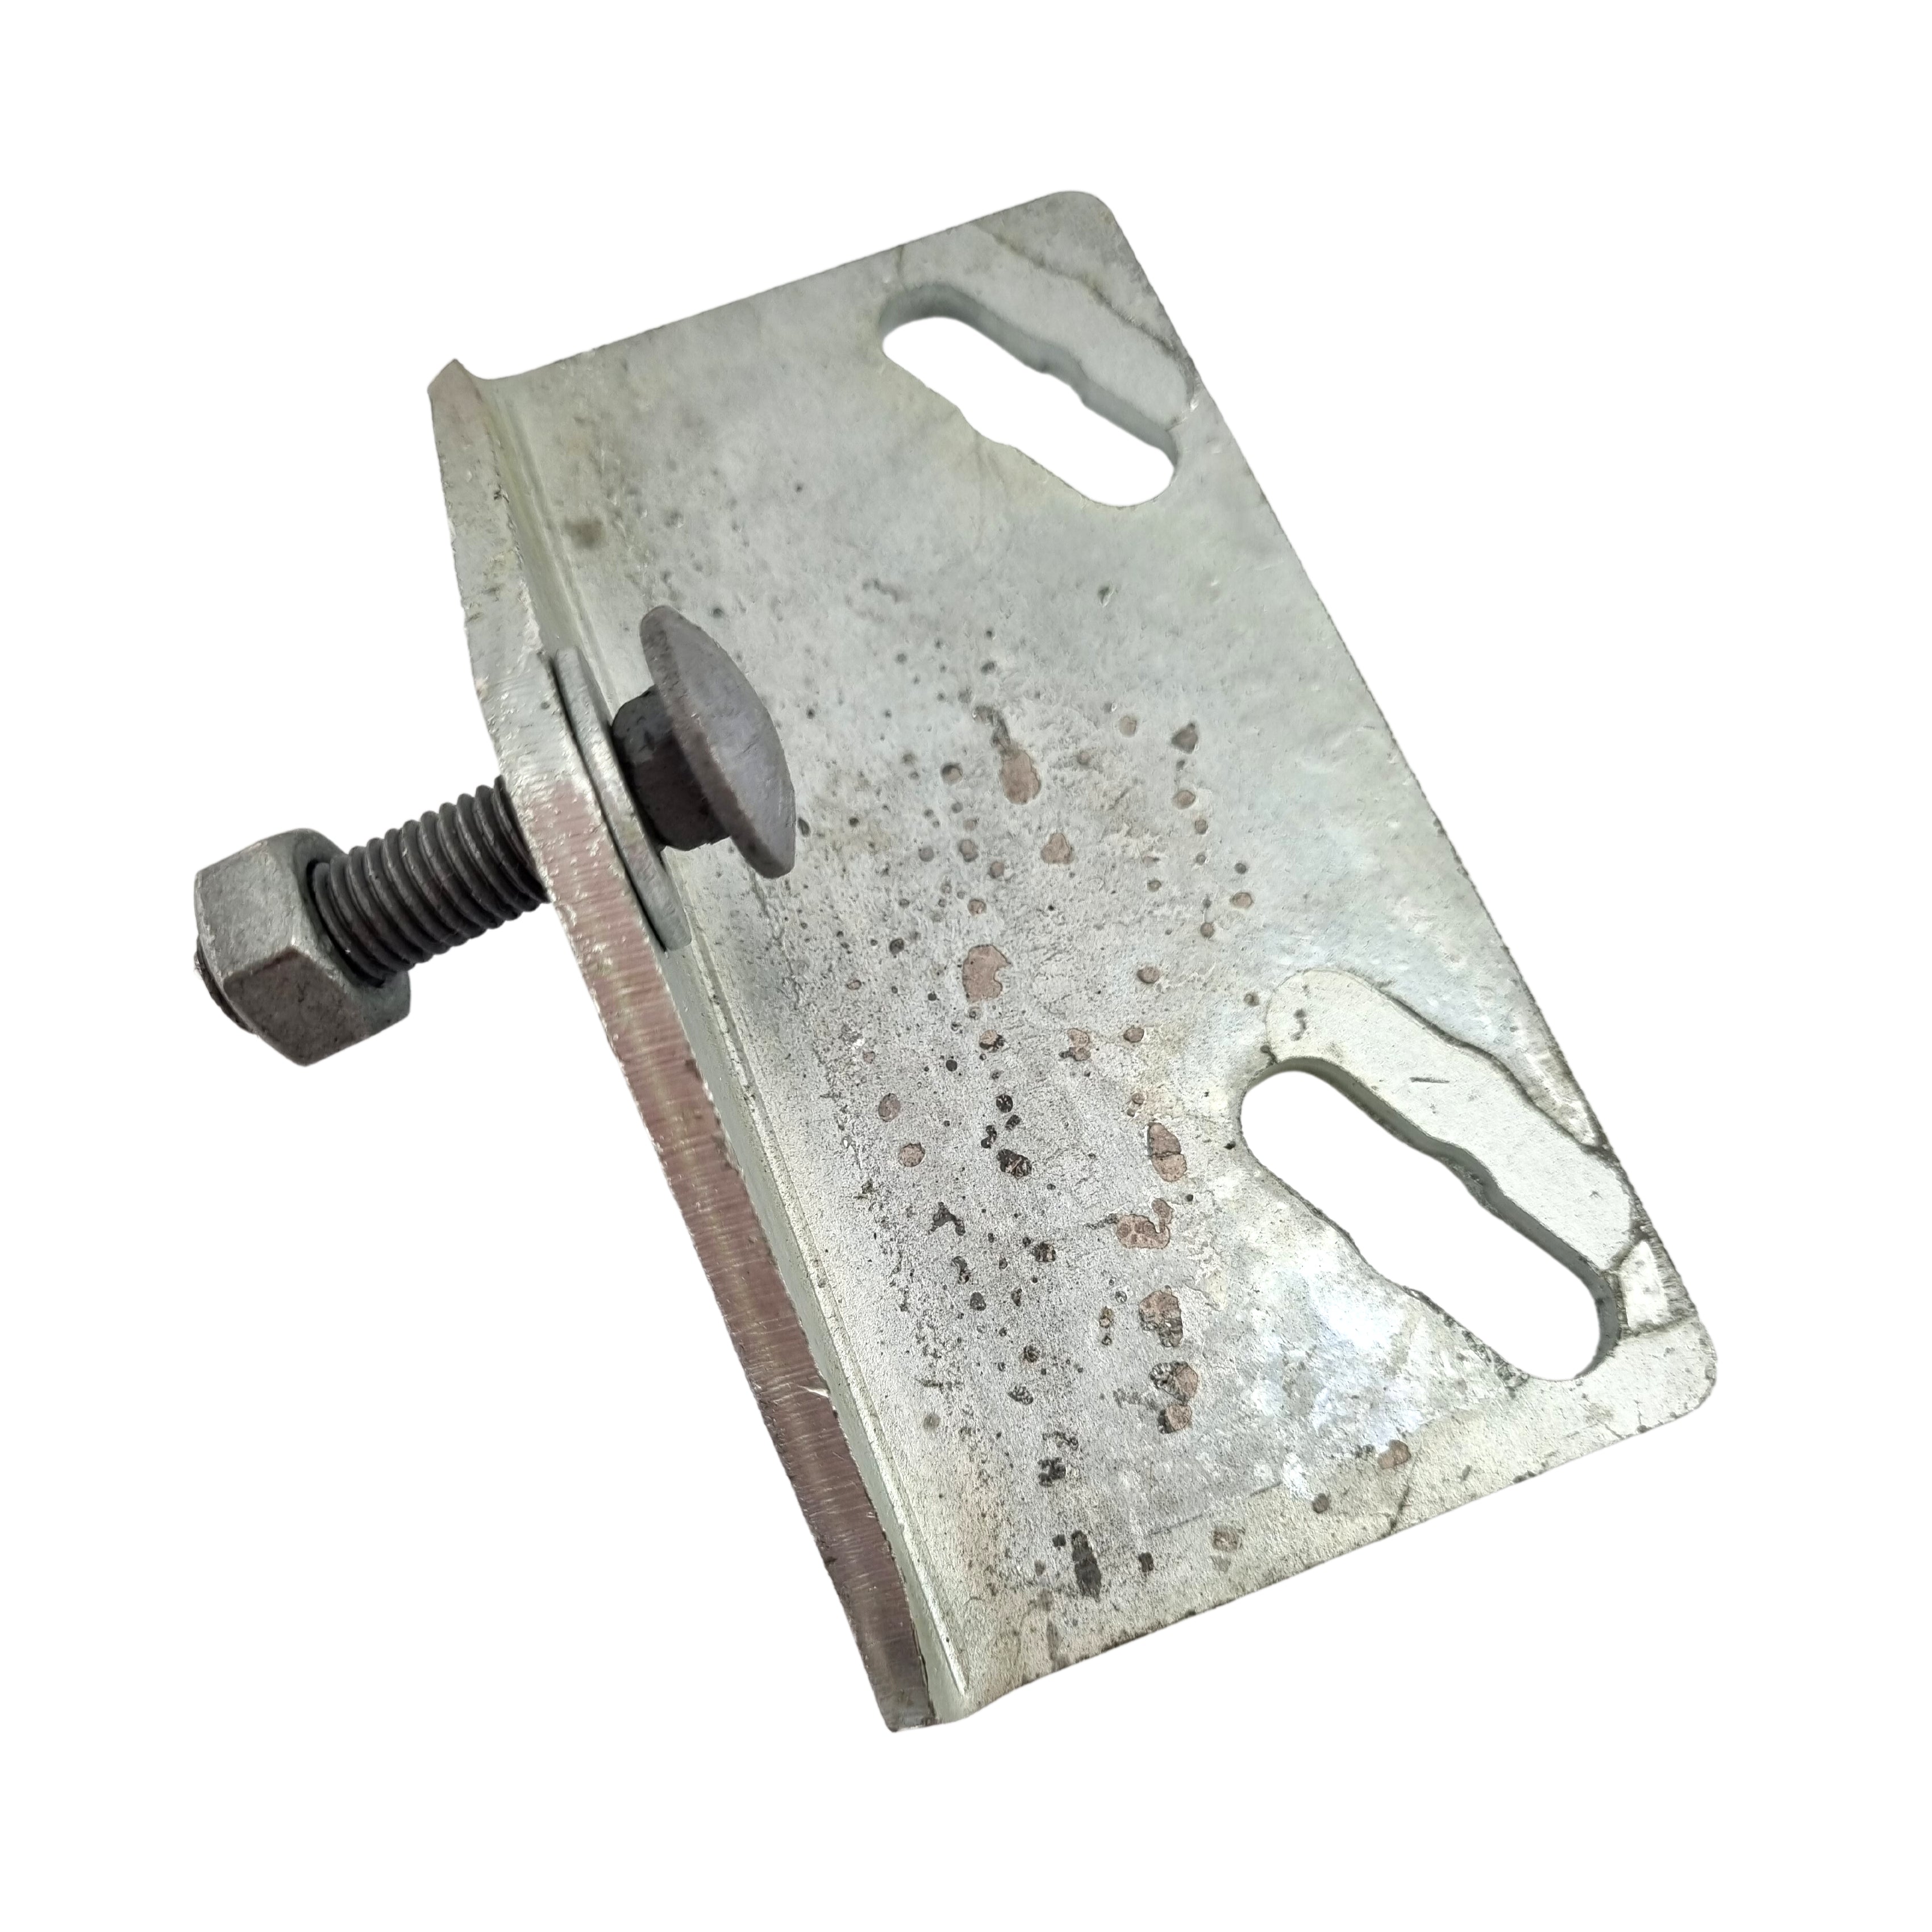 Low Clearance Wall Bracket Assembly in a galvanised finish, Australian made. Product code: UFFLCWB. Australia wide shipping. Shop: chain.com.au